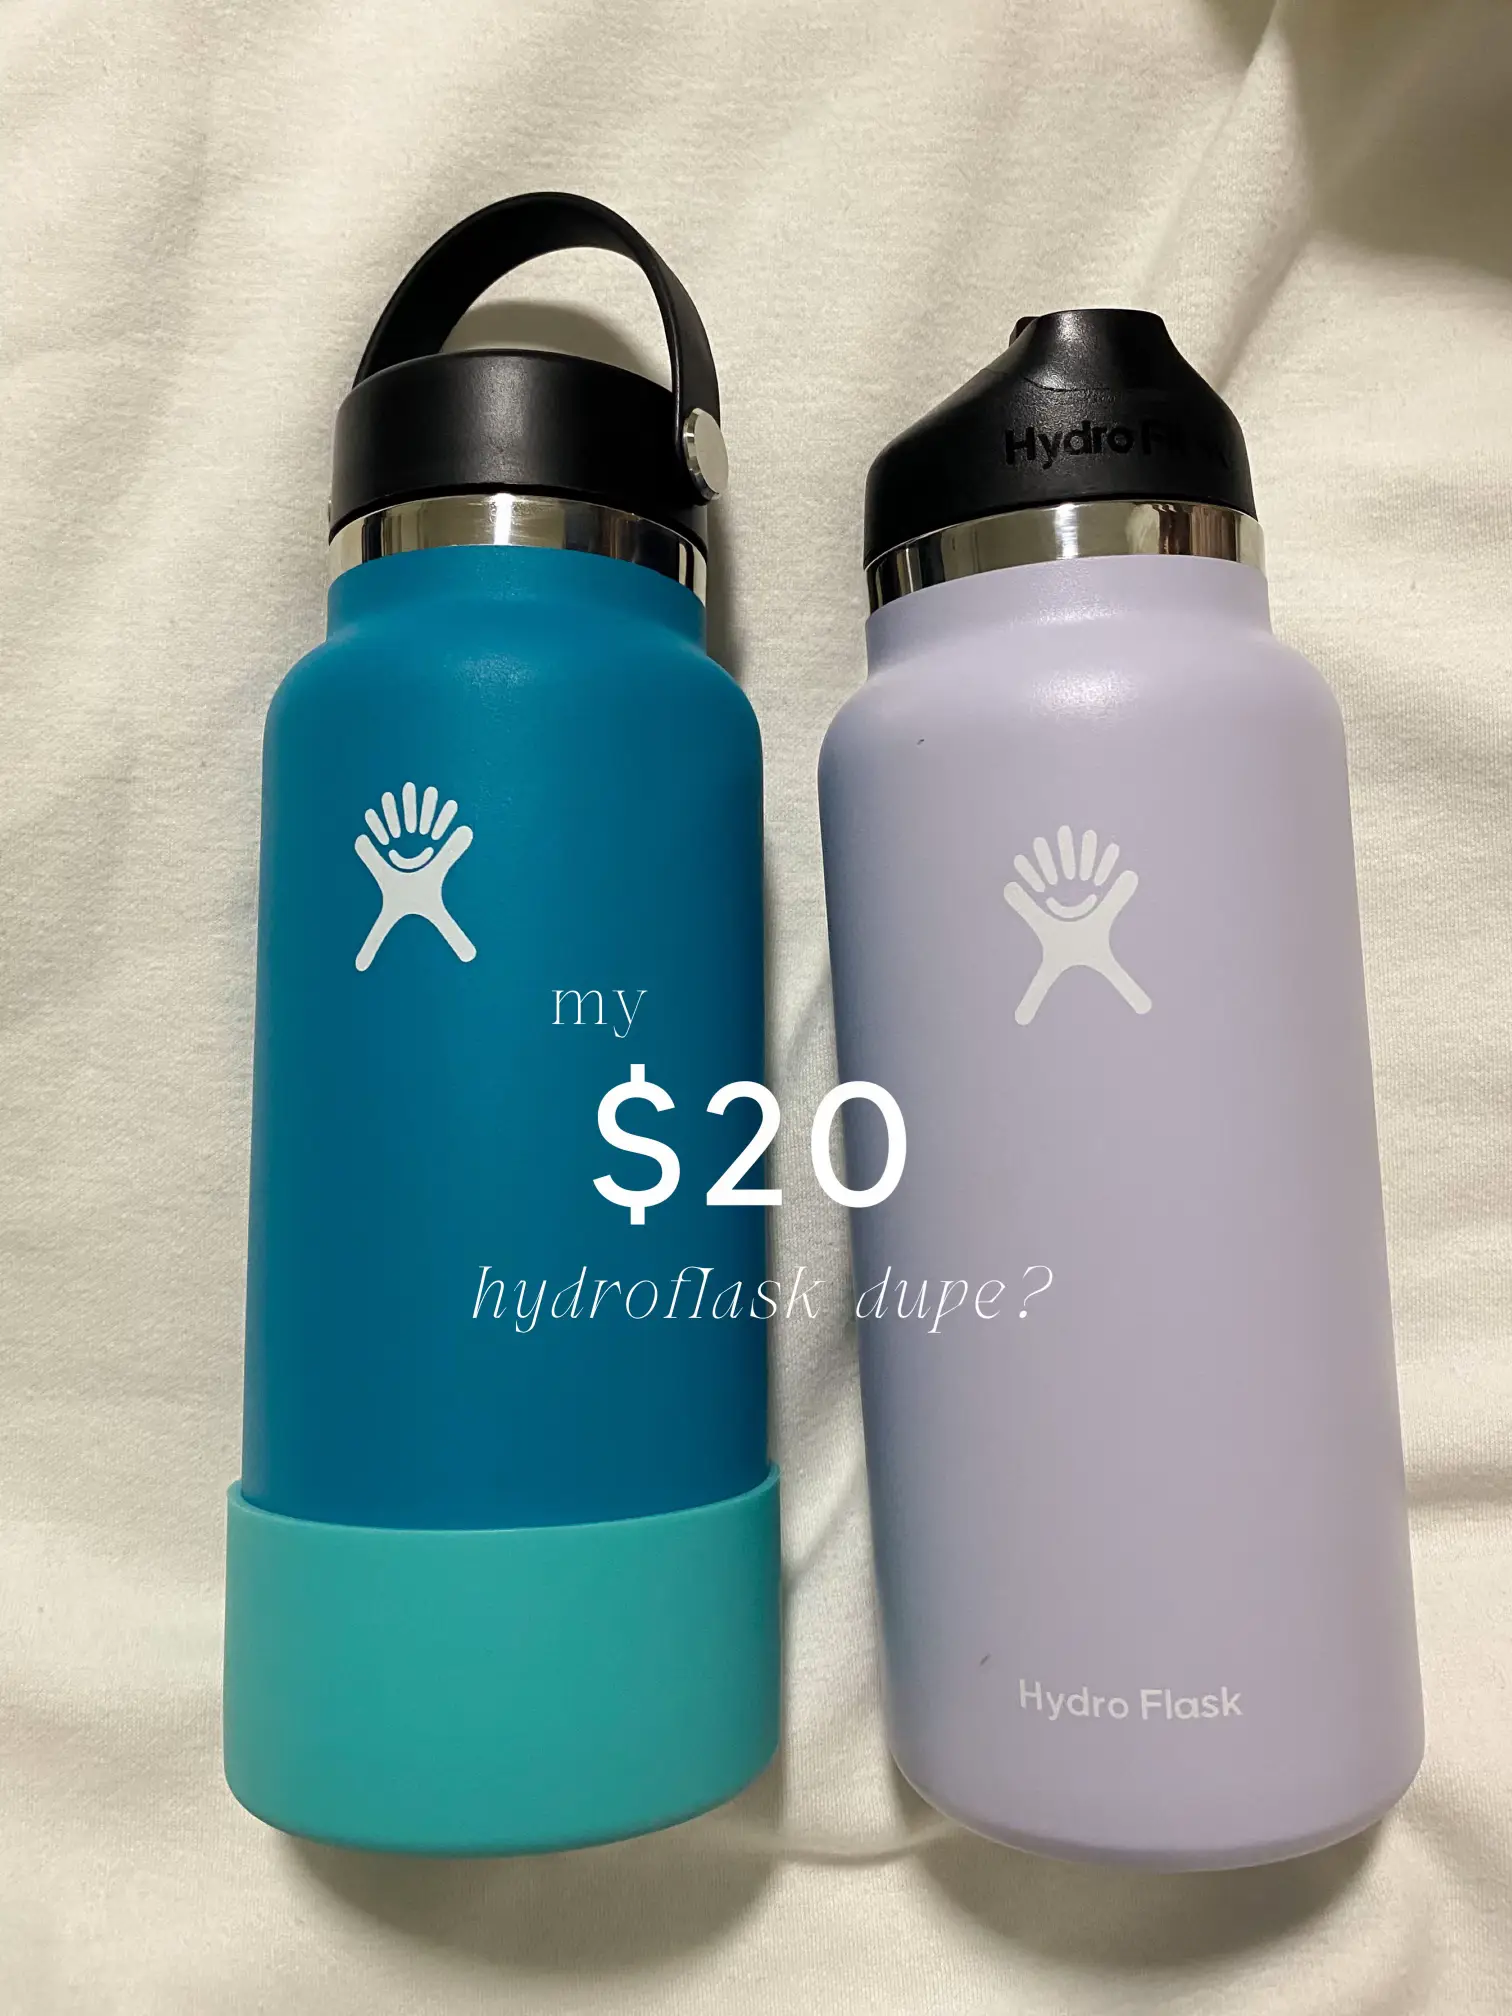 i found a $20 hydroflask dupe!, Gallery posted by rach